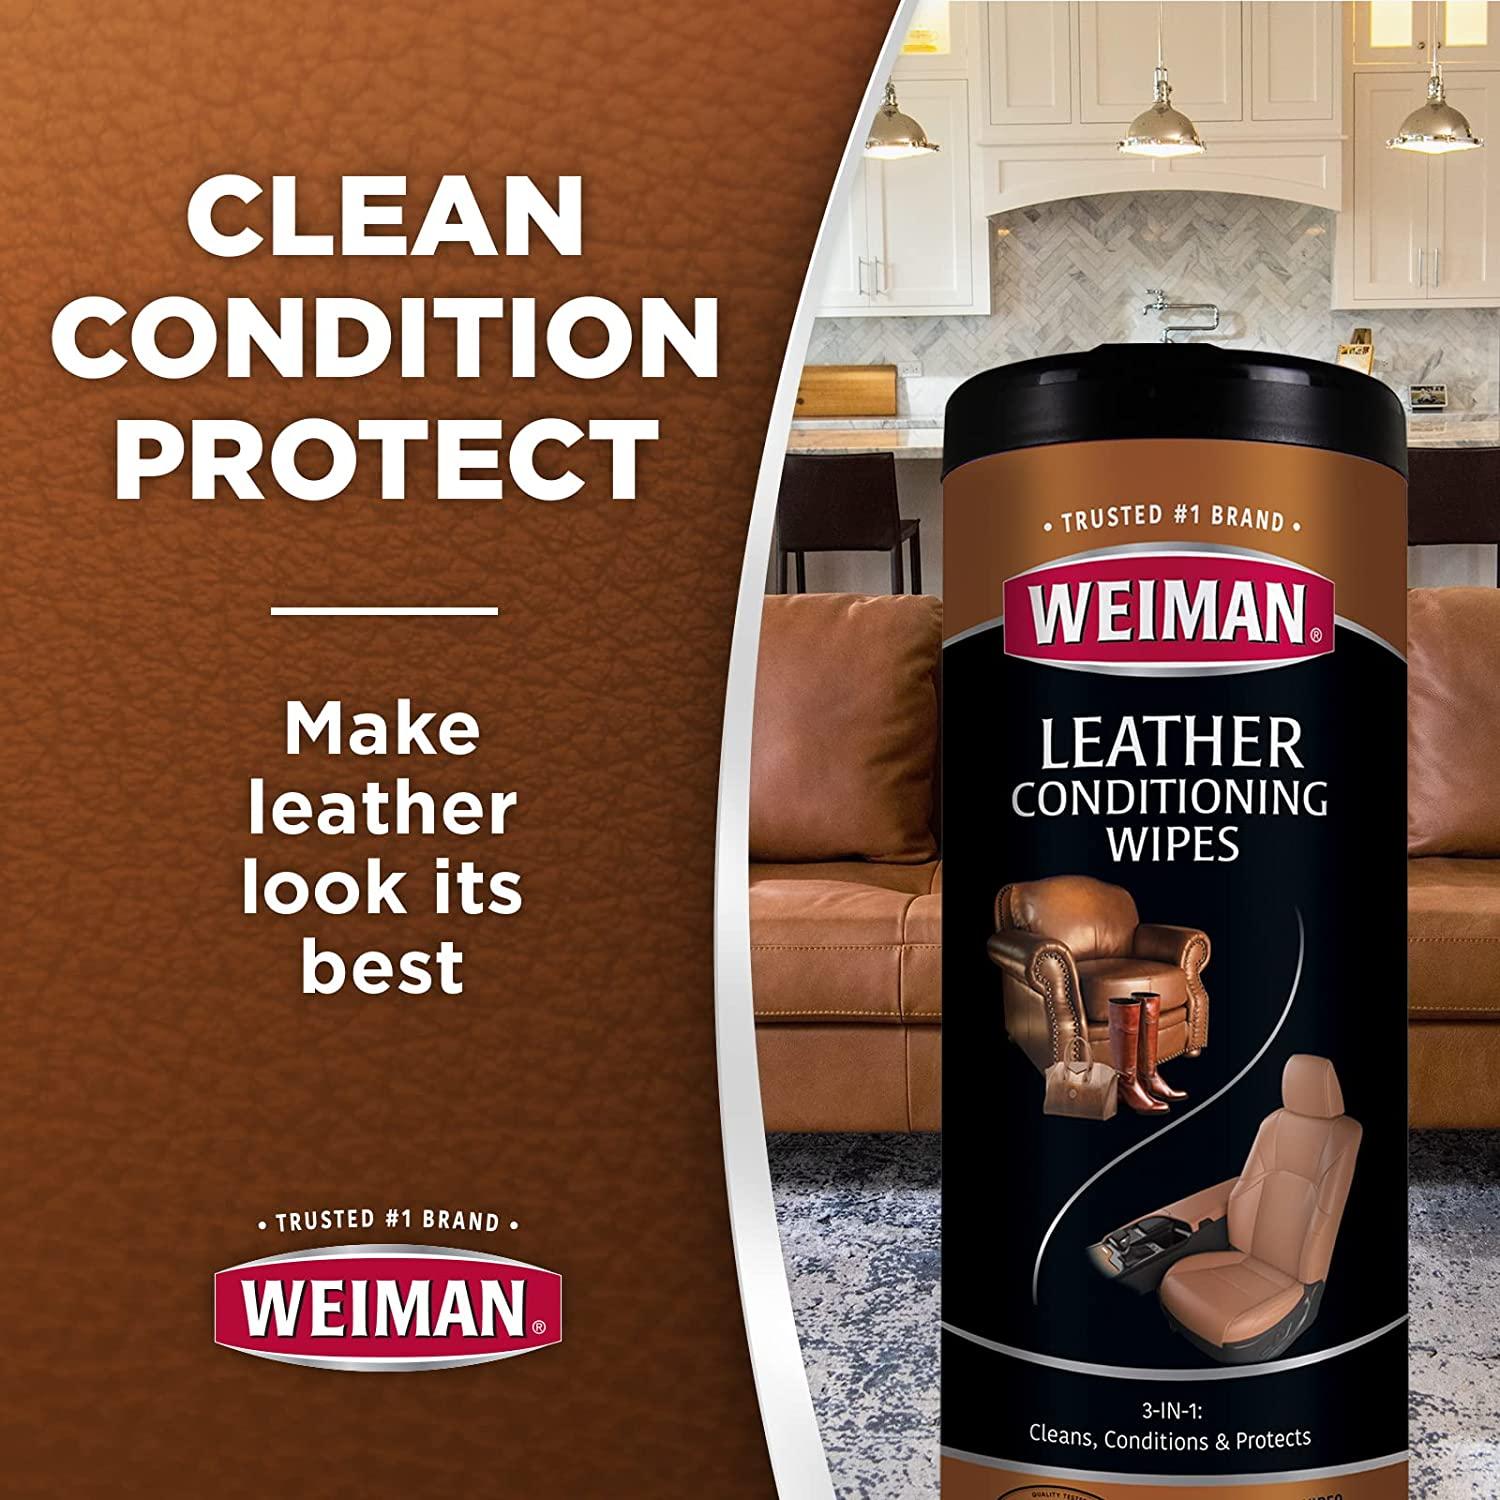 Weiman Leather Wipes - 3 Pack - Clean, Condition, Ultra Violet Protection  Help Prevent Cracking or Fading of Leather Furniture, Car Seats and  Interior, Shoes